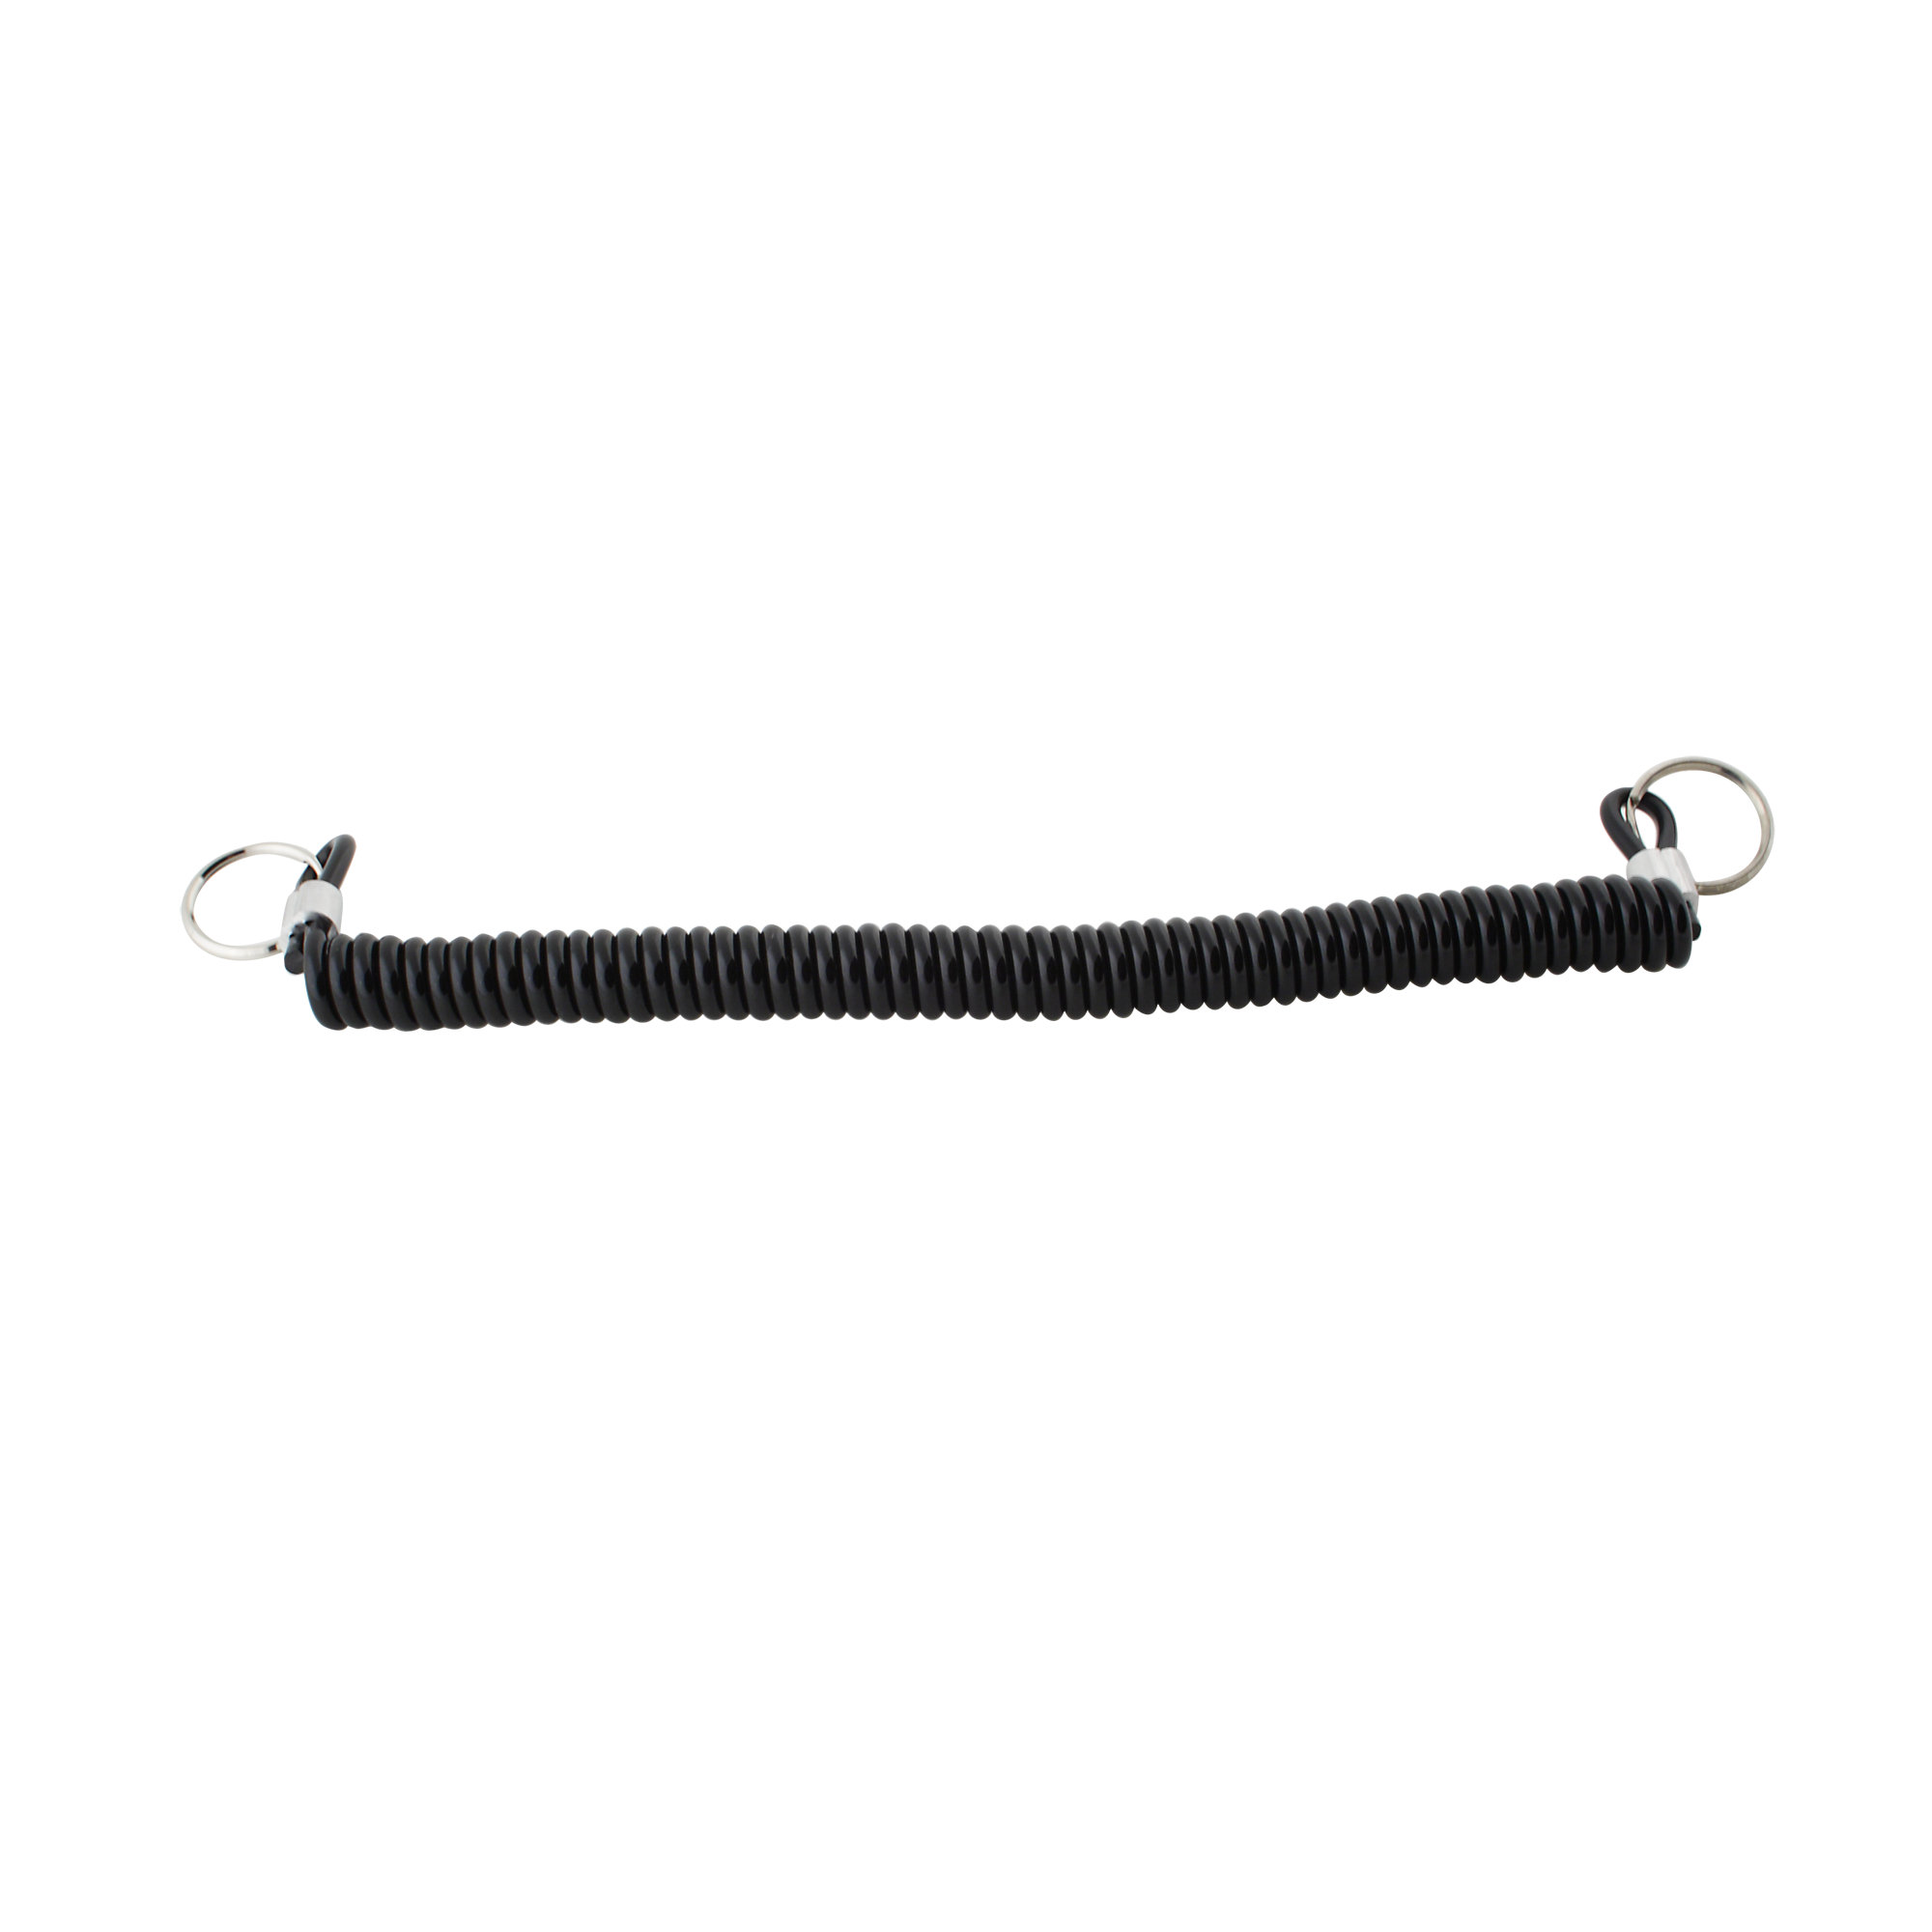 Pinkeeper, Heavy Duty Cord, Expands to 84"